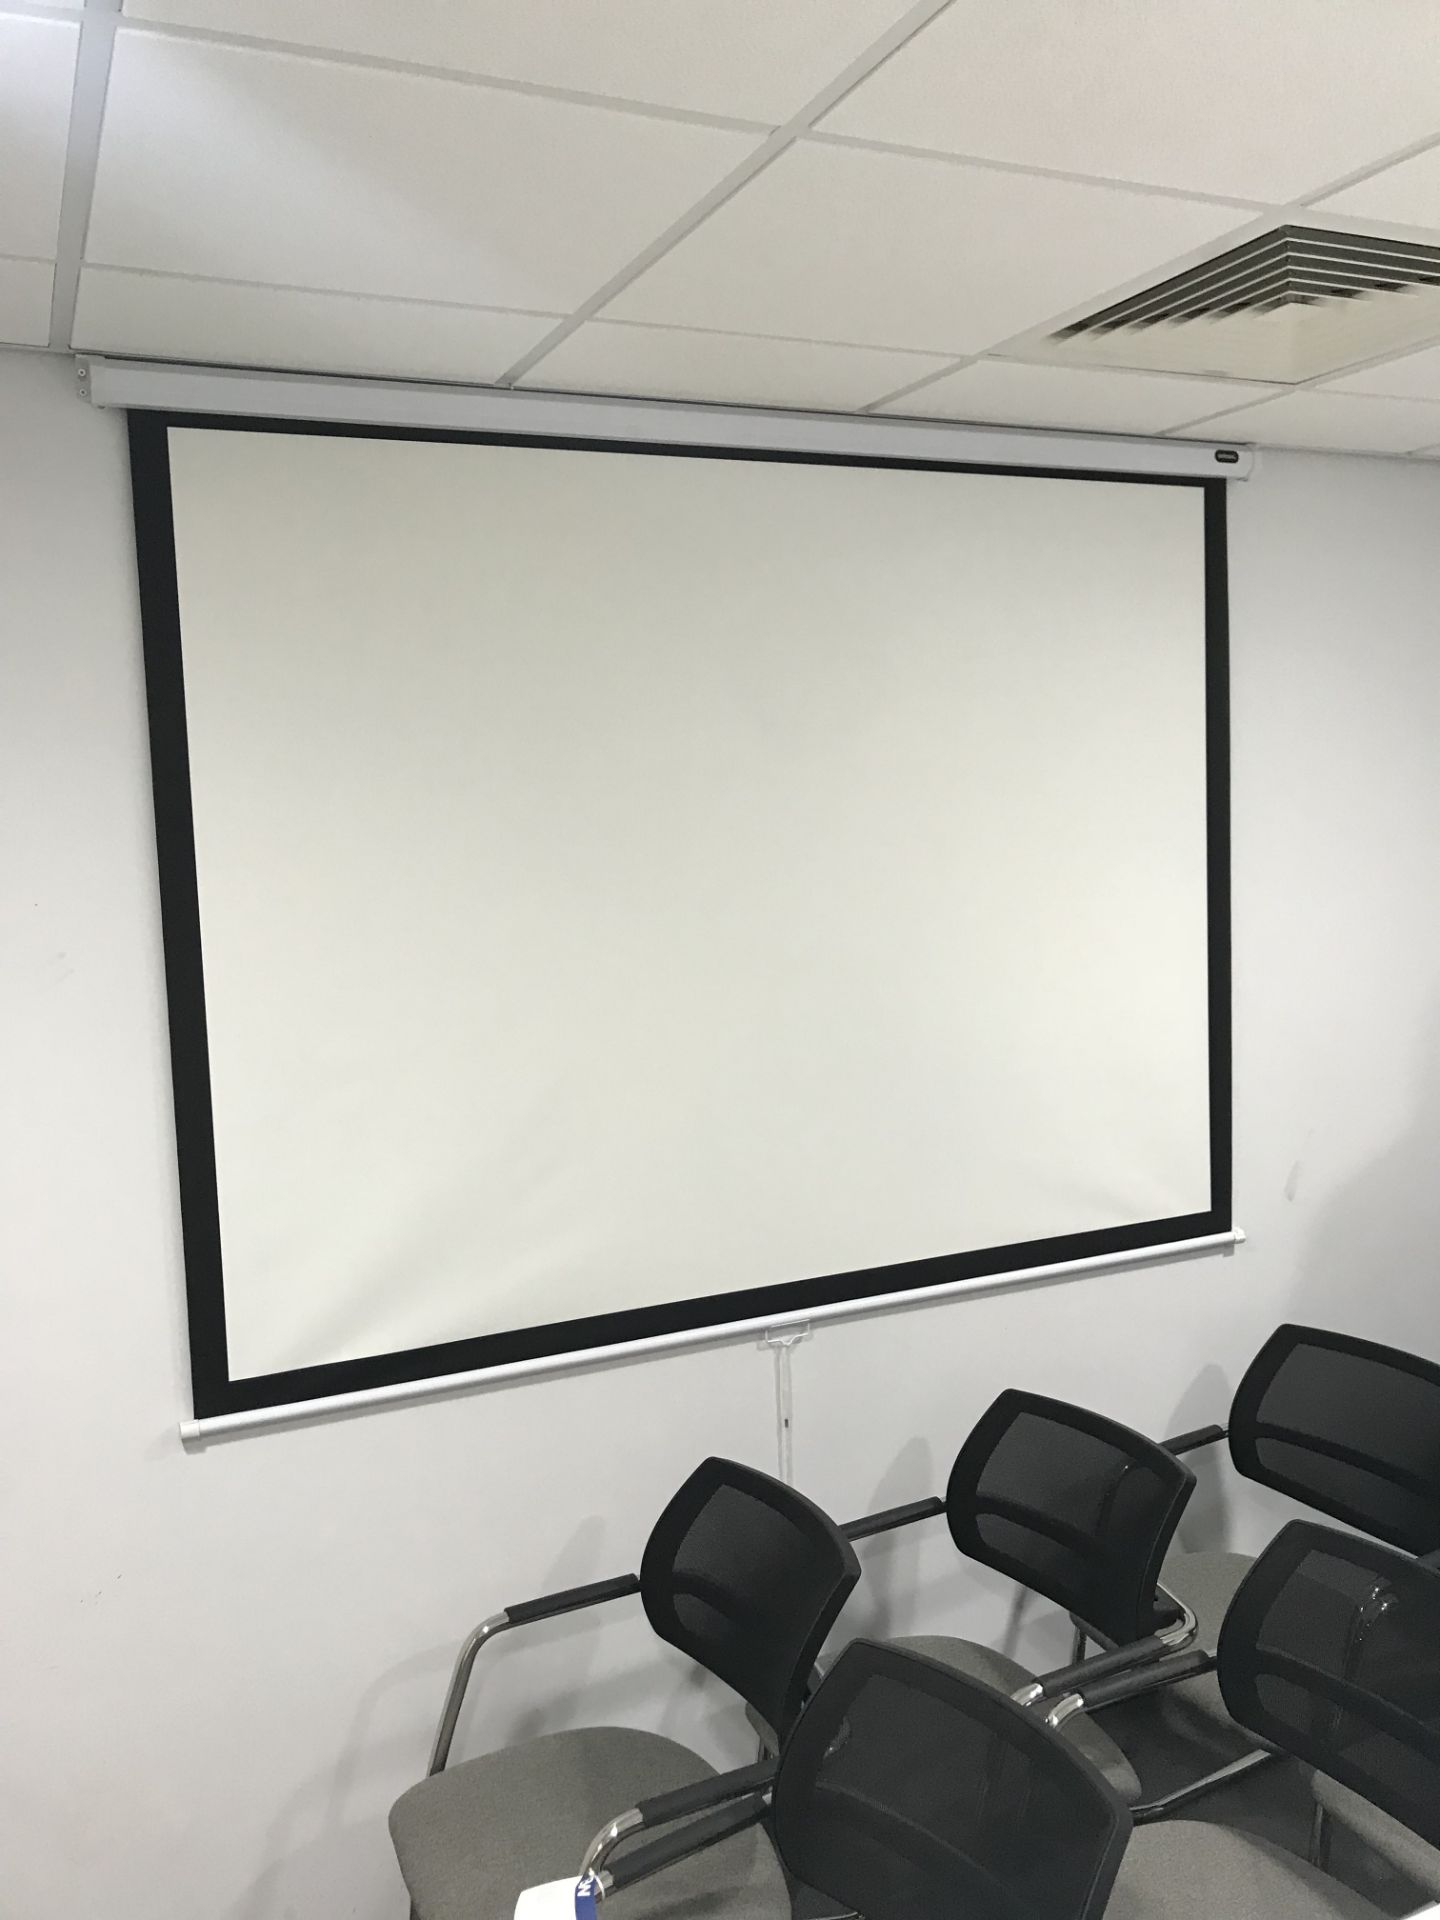 NEC V302X HD Projector c/w Select On Projector Scr - Image 2 of 2